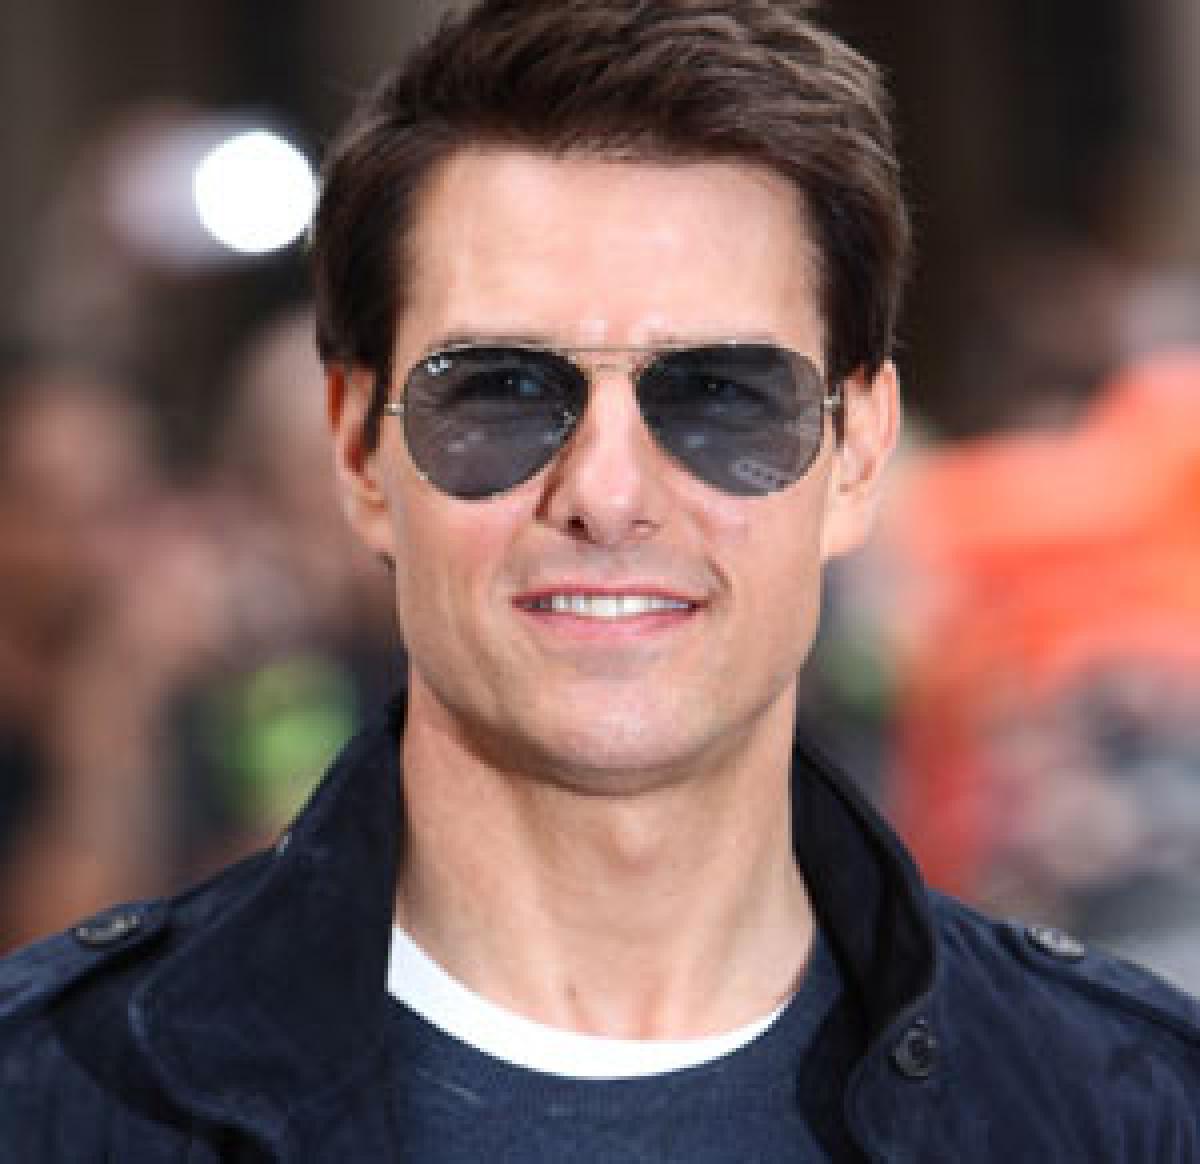 Tom Cruise in talks for The Mummy reboot